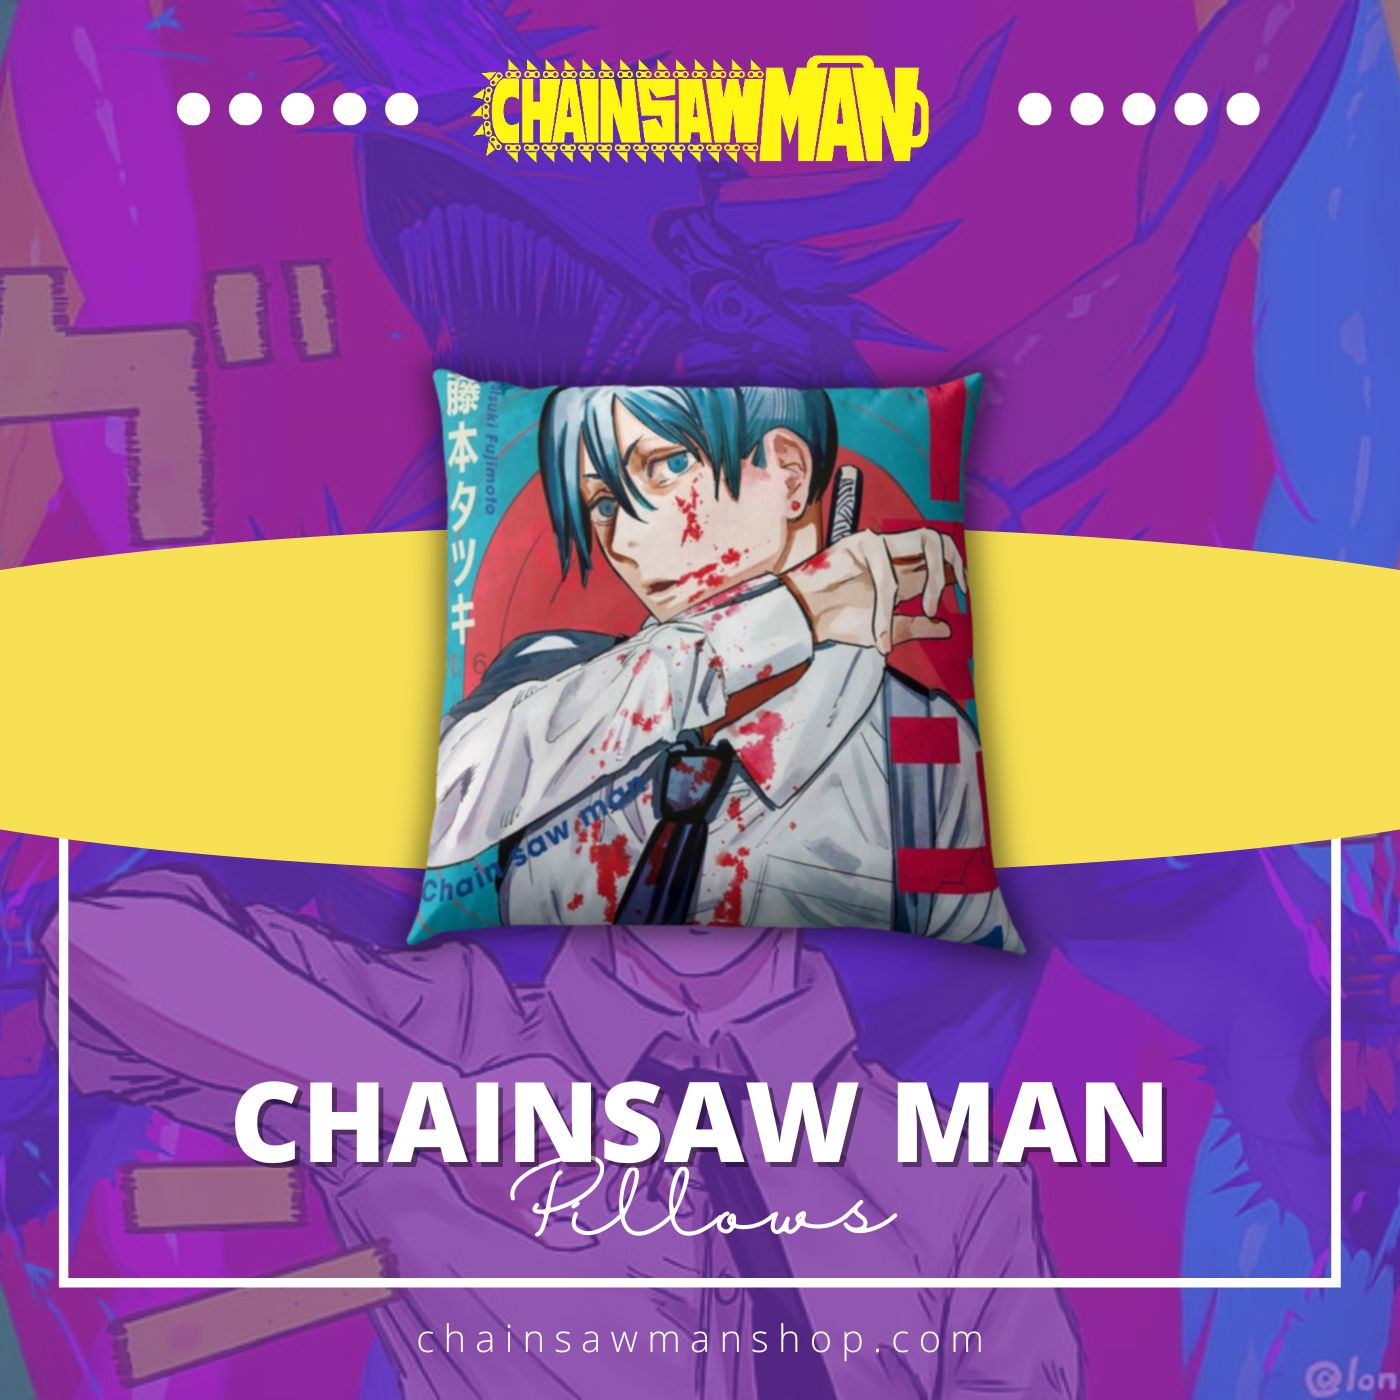 chainsaw man: Which Chainsaw man character are you based on your MBTI?